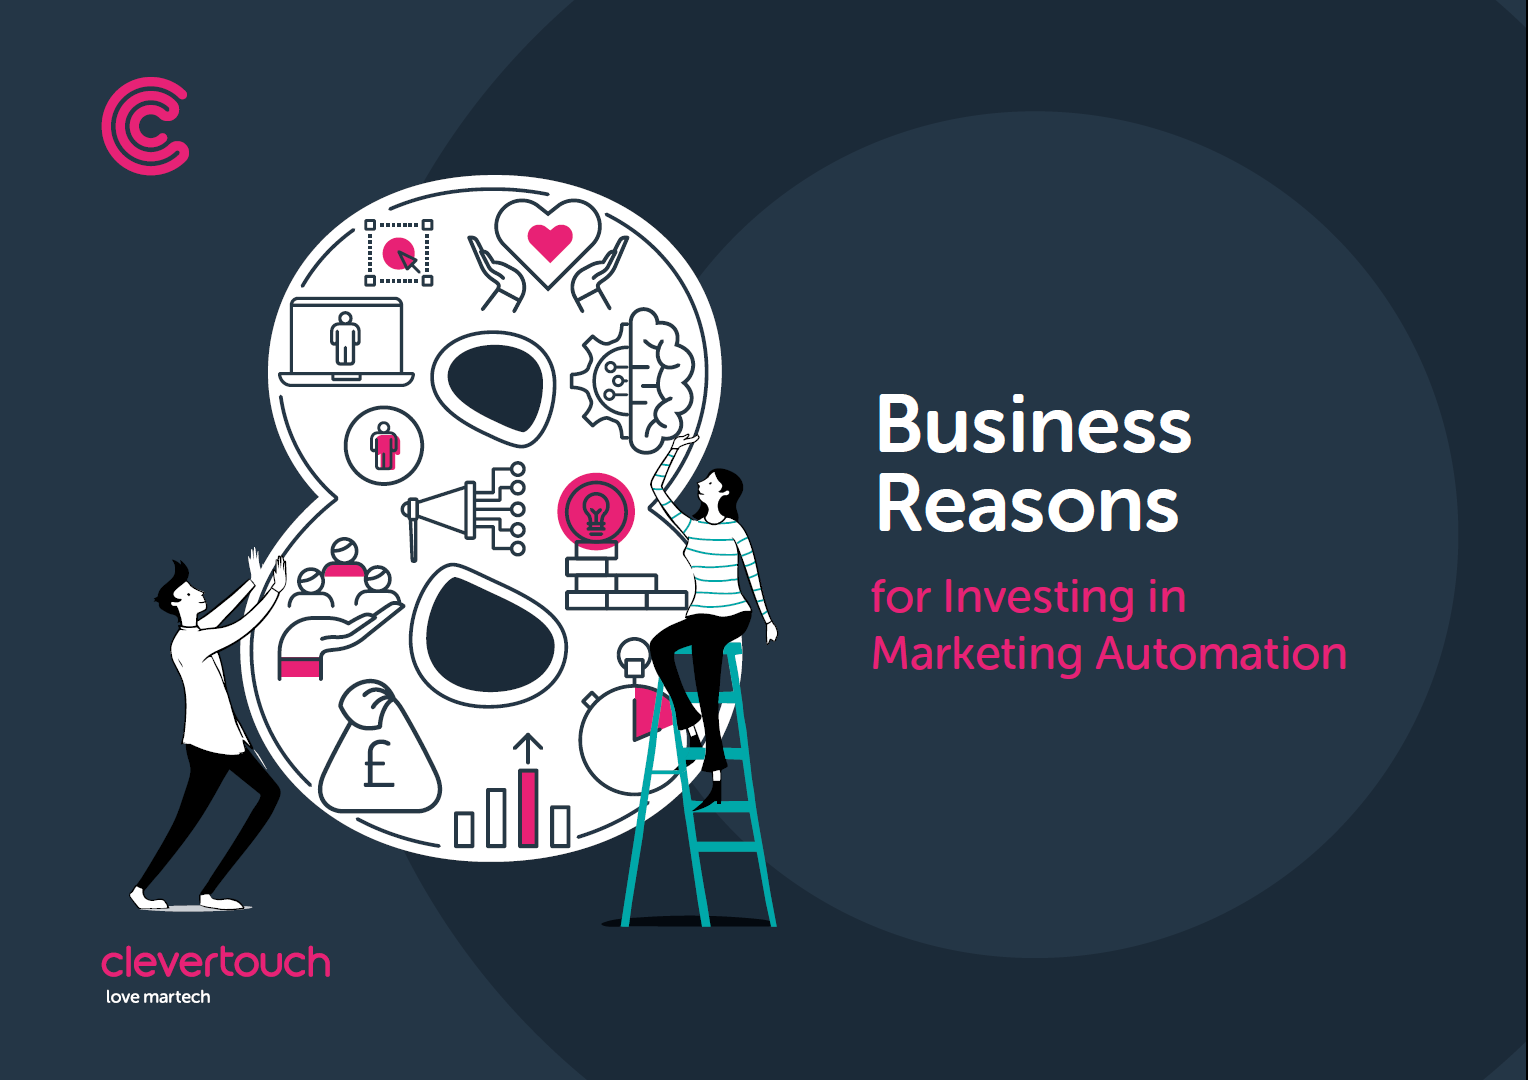 Clevertouch | Eight reasons for investing in Marketing Automation